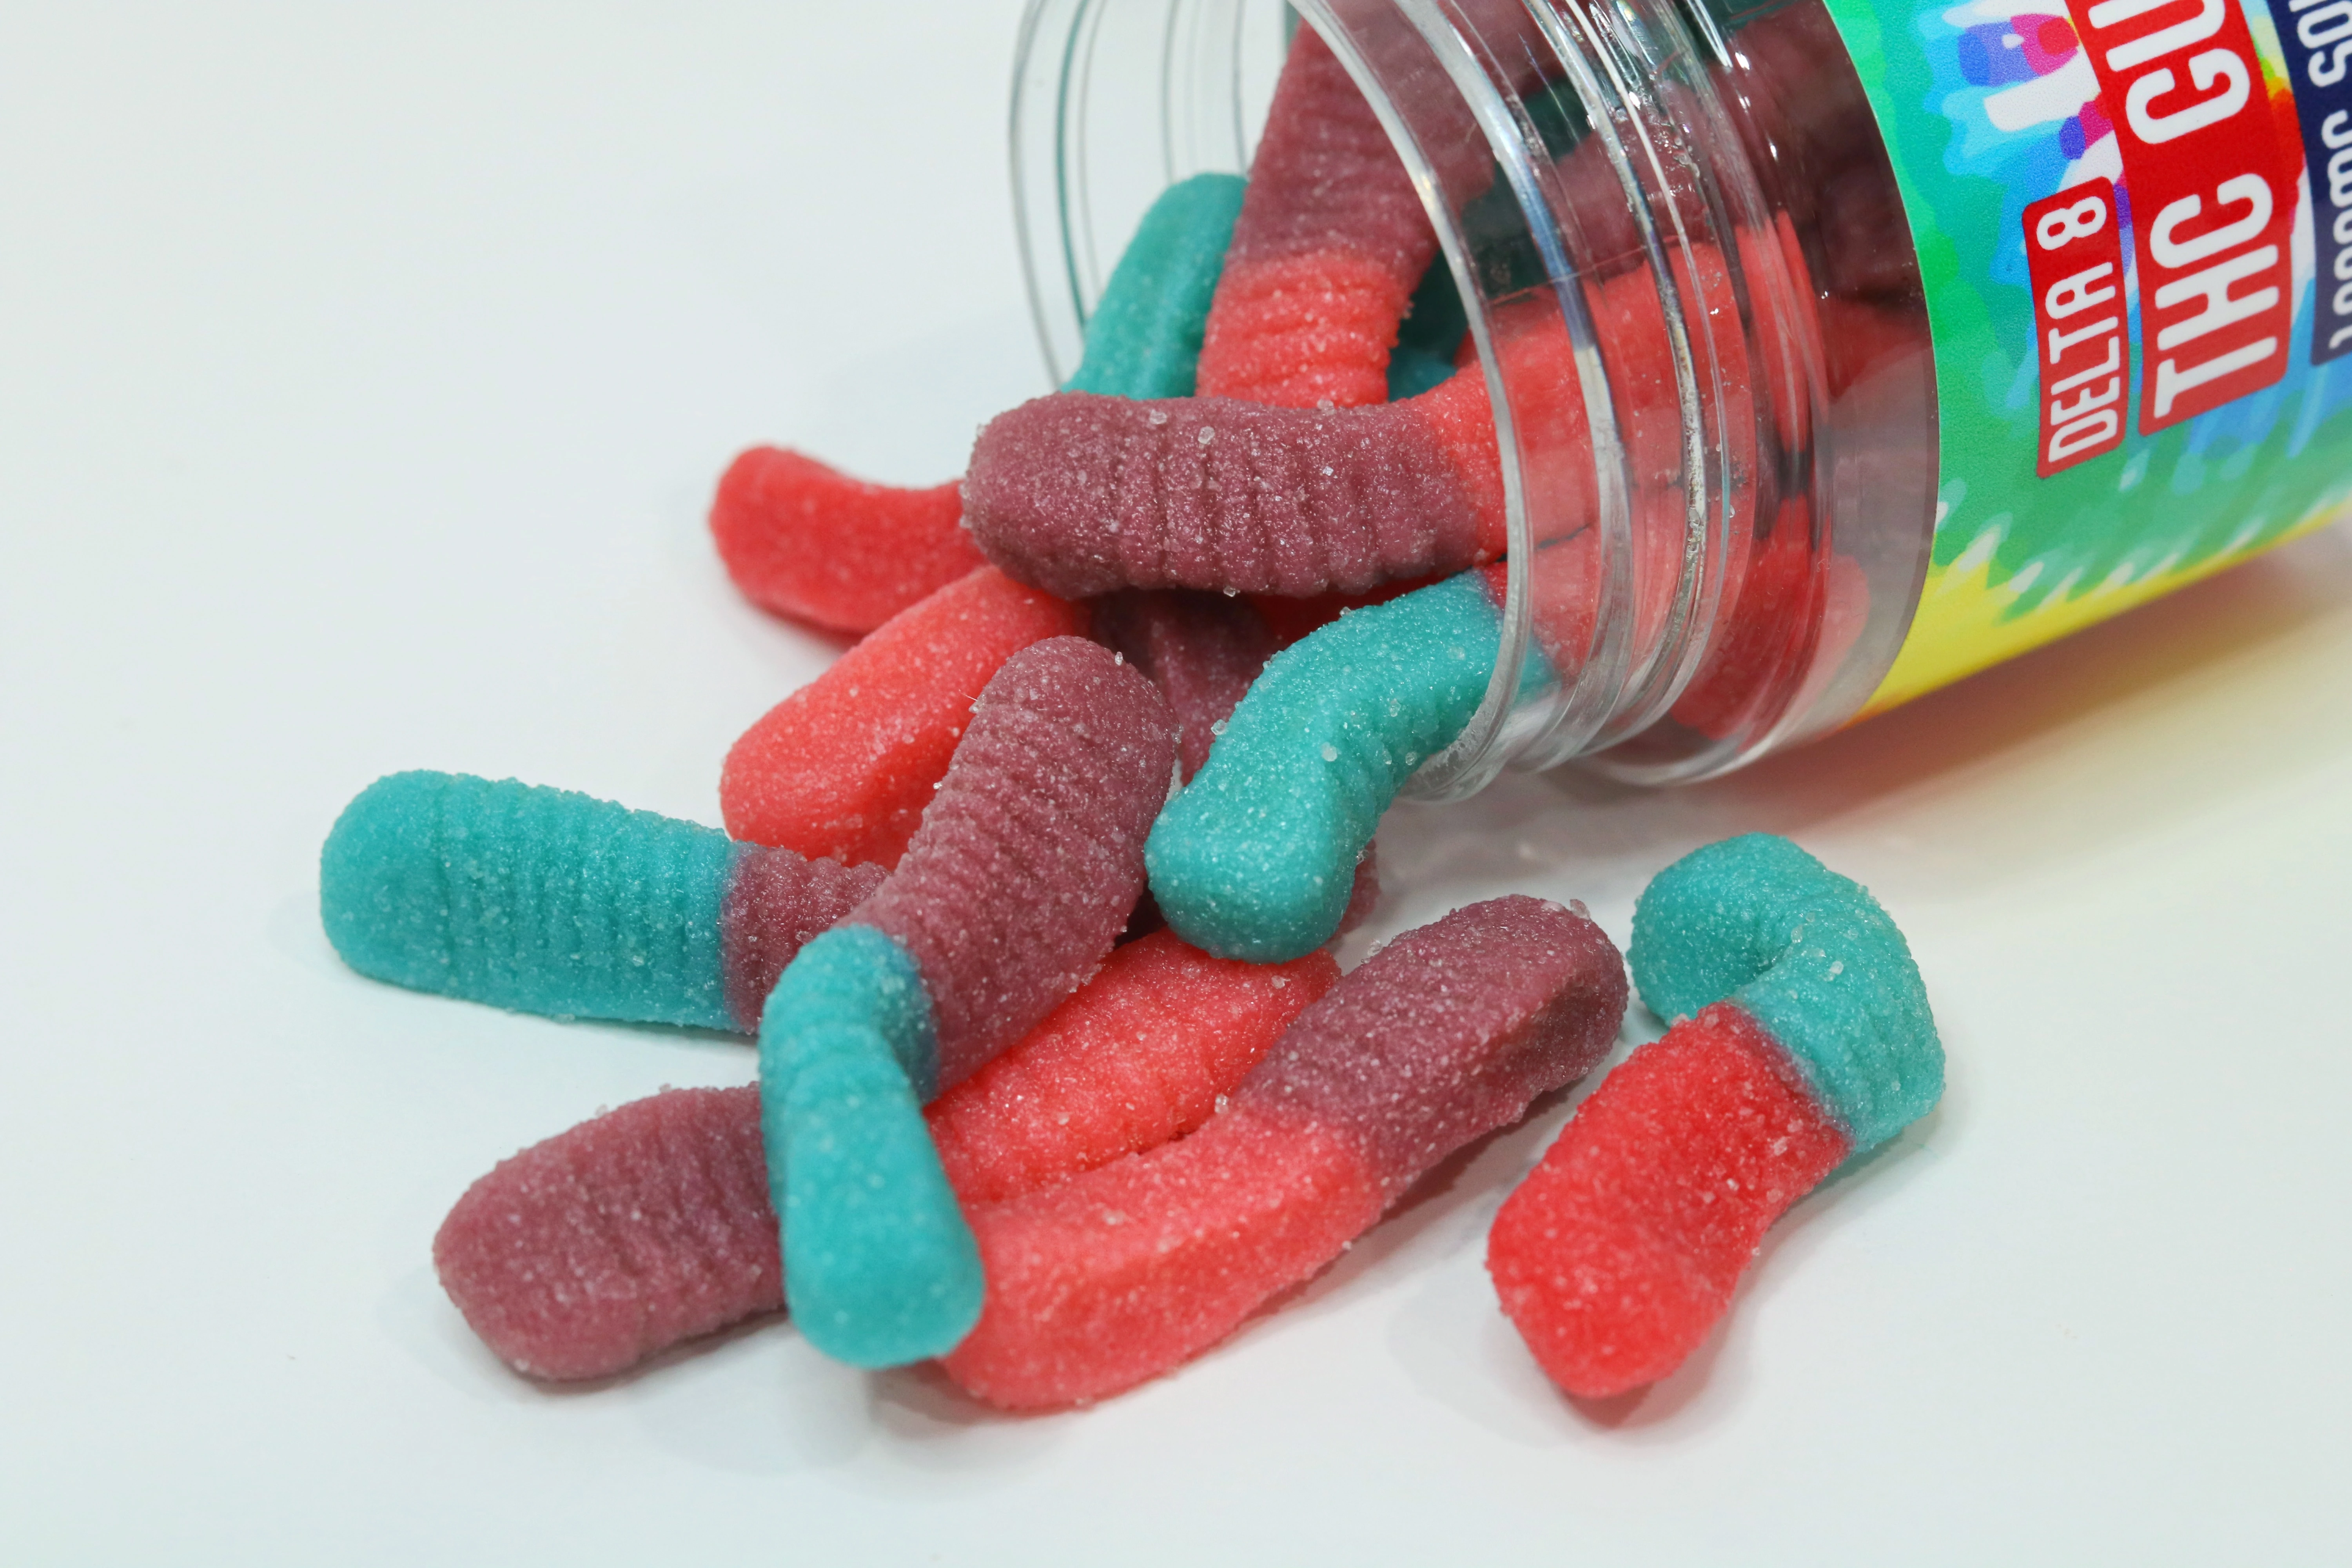 Delta 8 Sour Worms 1000mg